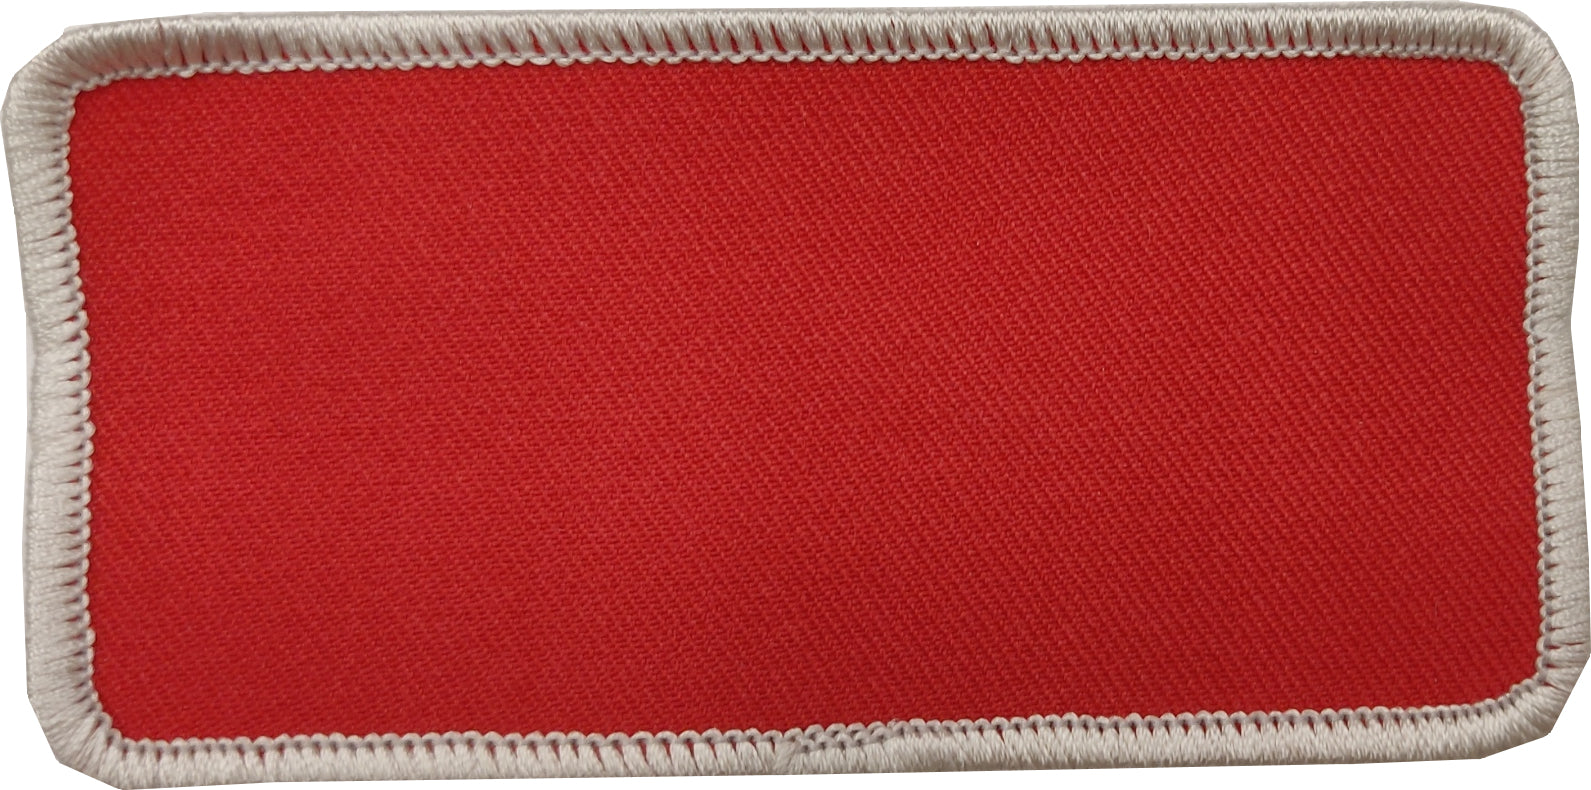 rectangle-blank-patch-2-x-4-red-background-silver-border